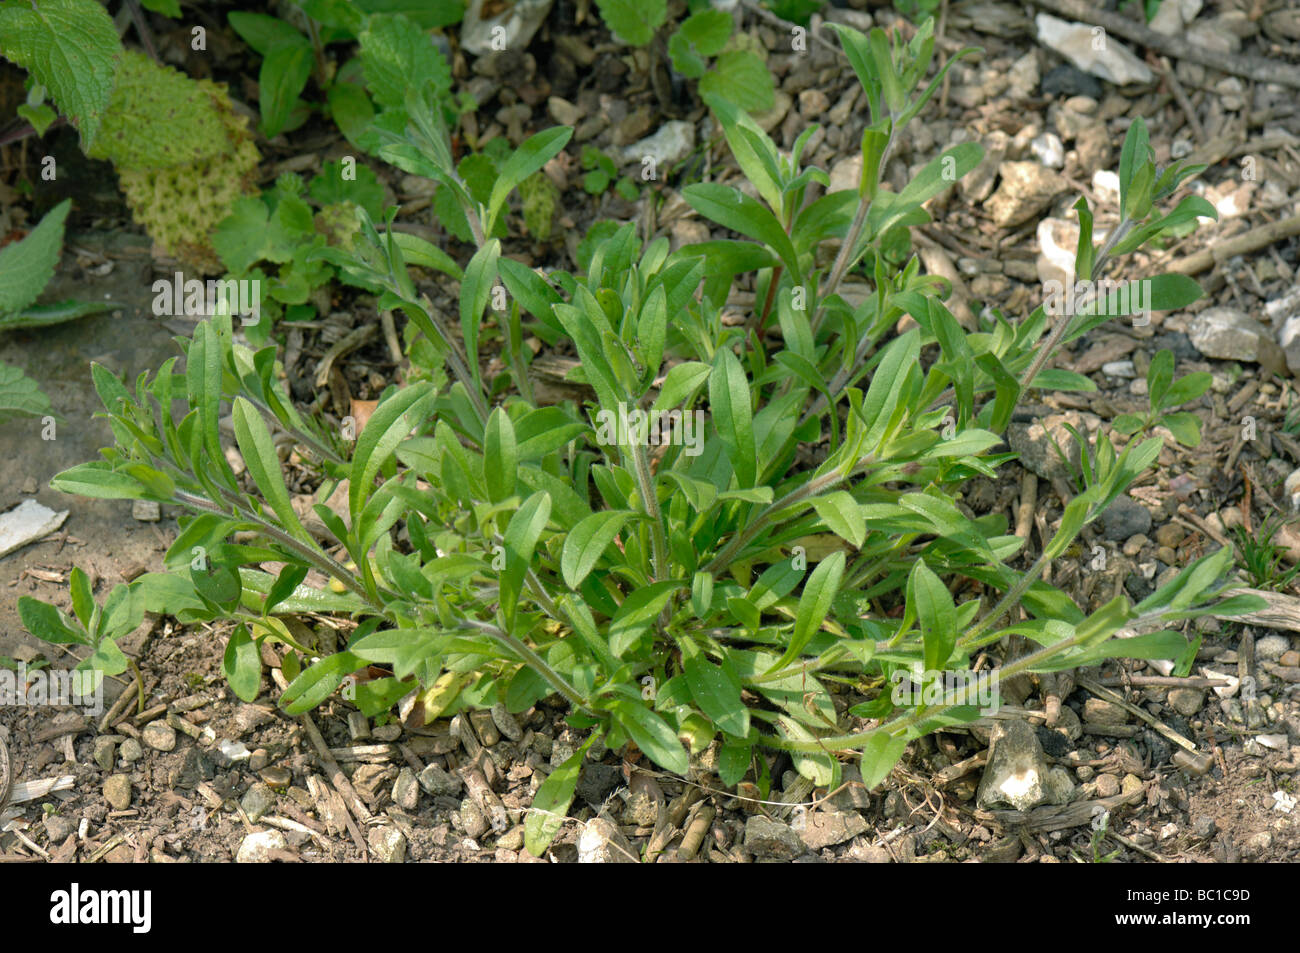 Forget me not Myosotis arvensis spreading plant with flower buds forming Stock Photo